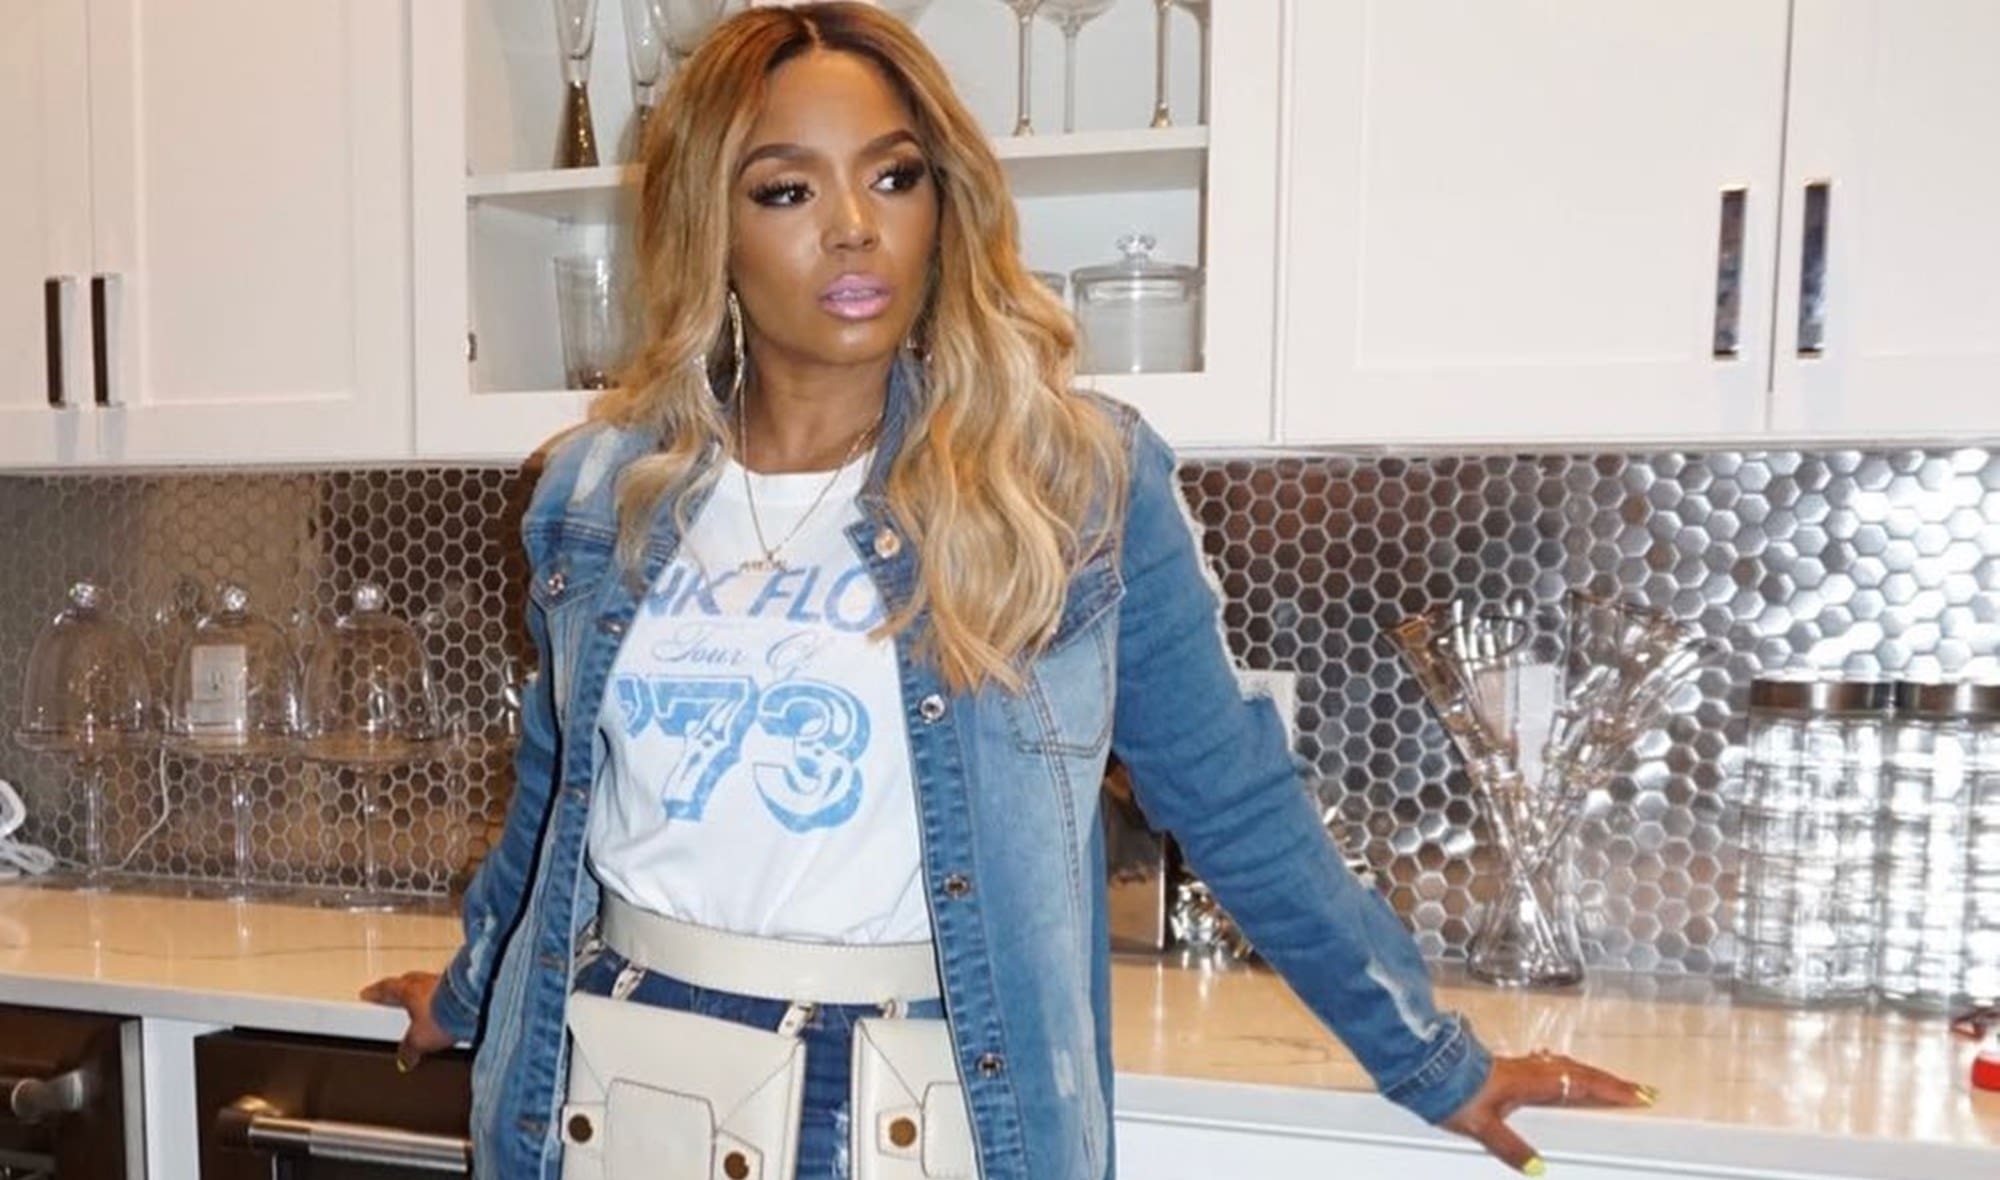 Rasheeda Frost Invites Fans To Order From The Frost Bistro - Check Out Her Juicy Meal!